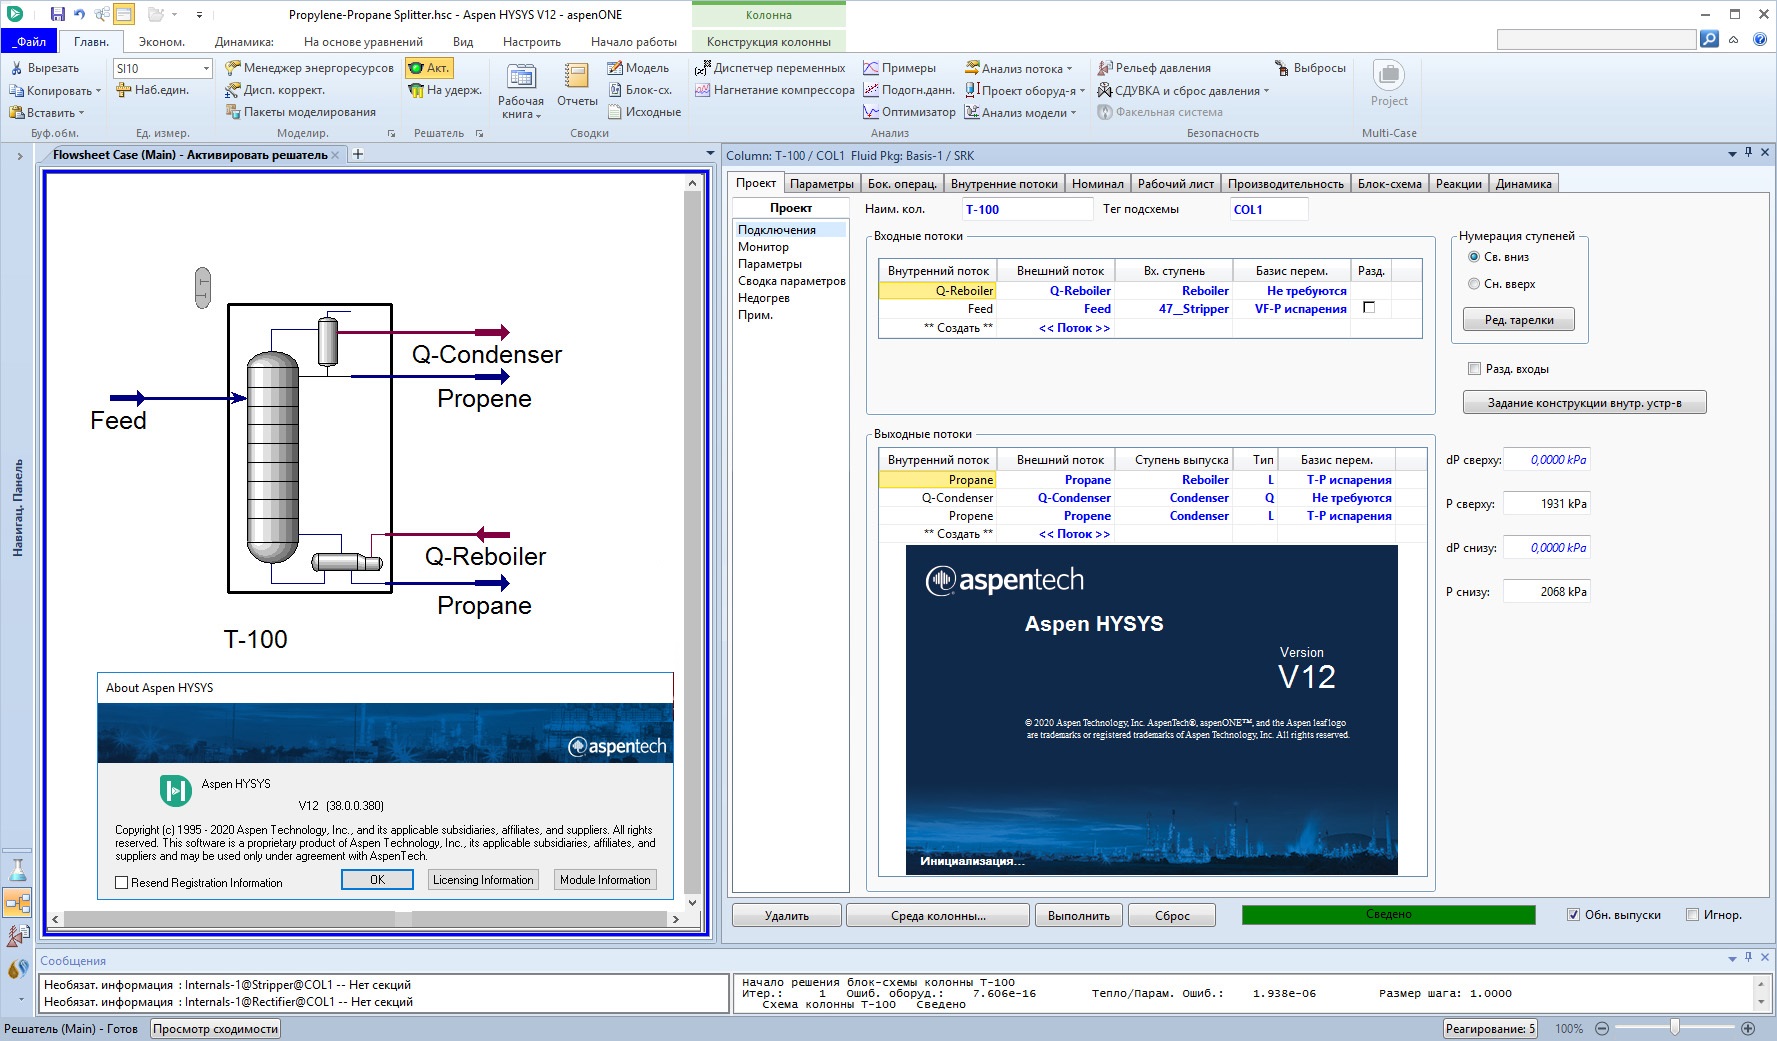 Working with aspenONE Suite 12.1 full